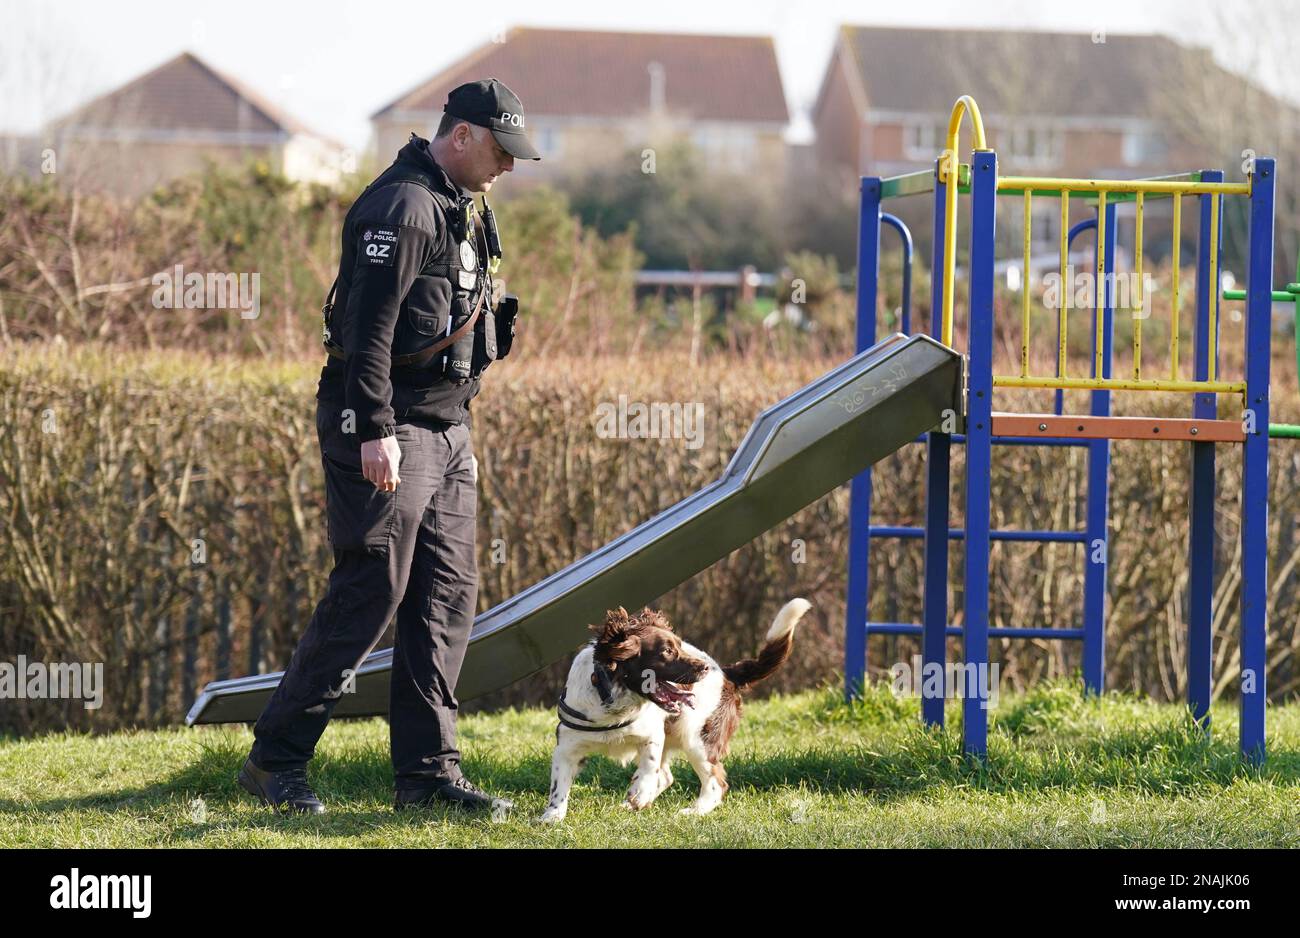 A police tracker dog near the scene in Waterson Vale, Chelmsford after the death of a 16-year-old boy in Essex. Police were called at around 11.30pm on Sunday following reports of a boy suffering serious injuries. He was taken to hospital where he died. An 18-year-old man has been arrested on suspicion of murder. Picture date: Monday February 13, 2023. Stock Photo